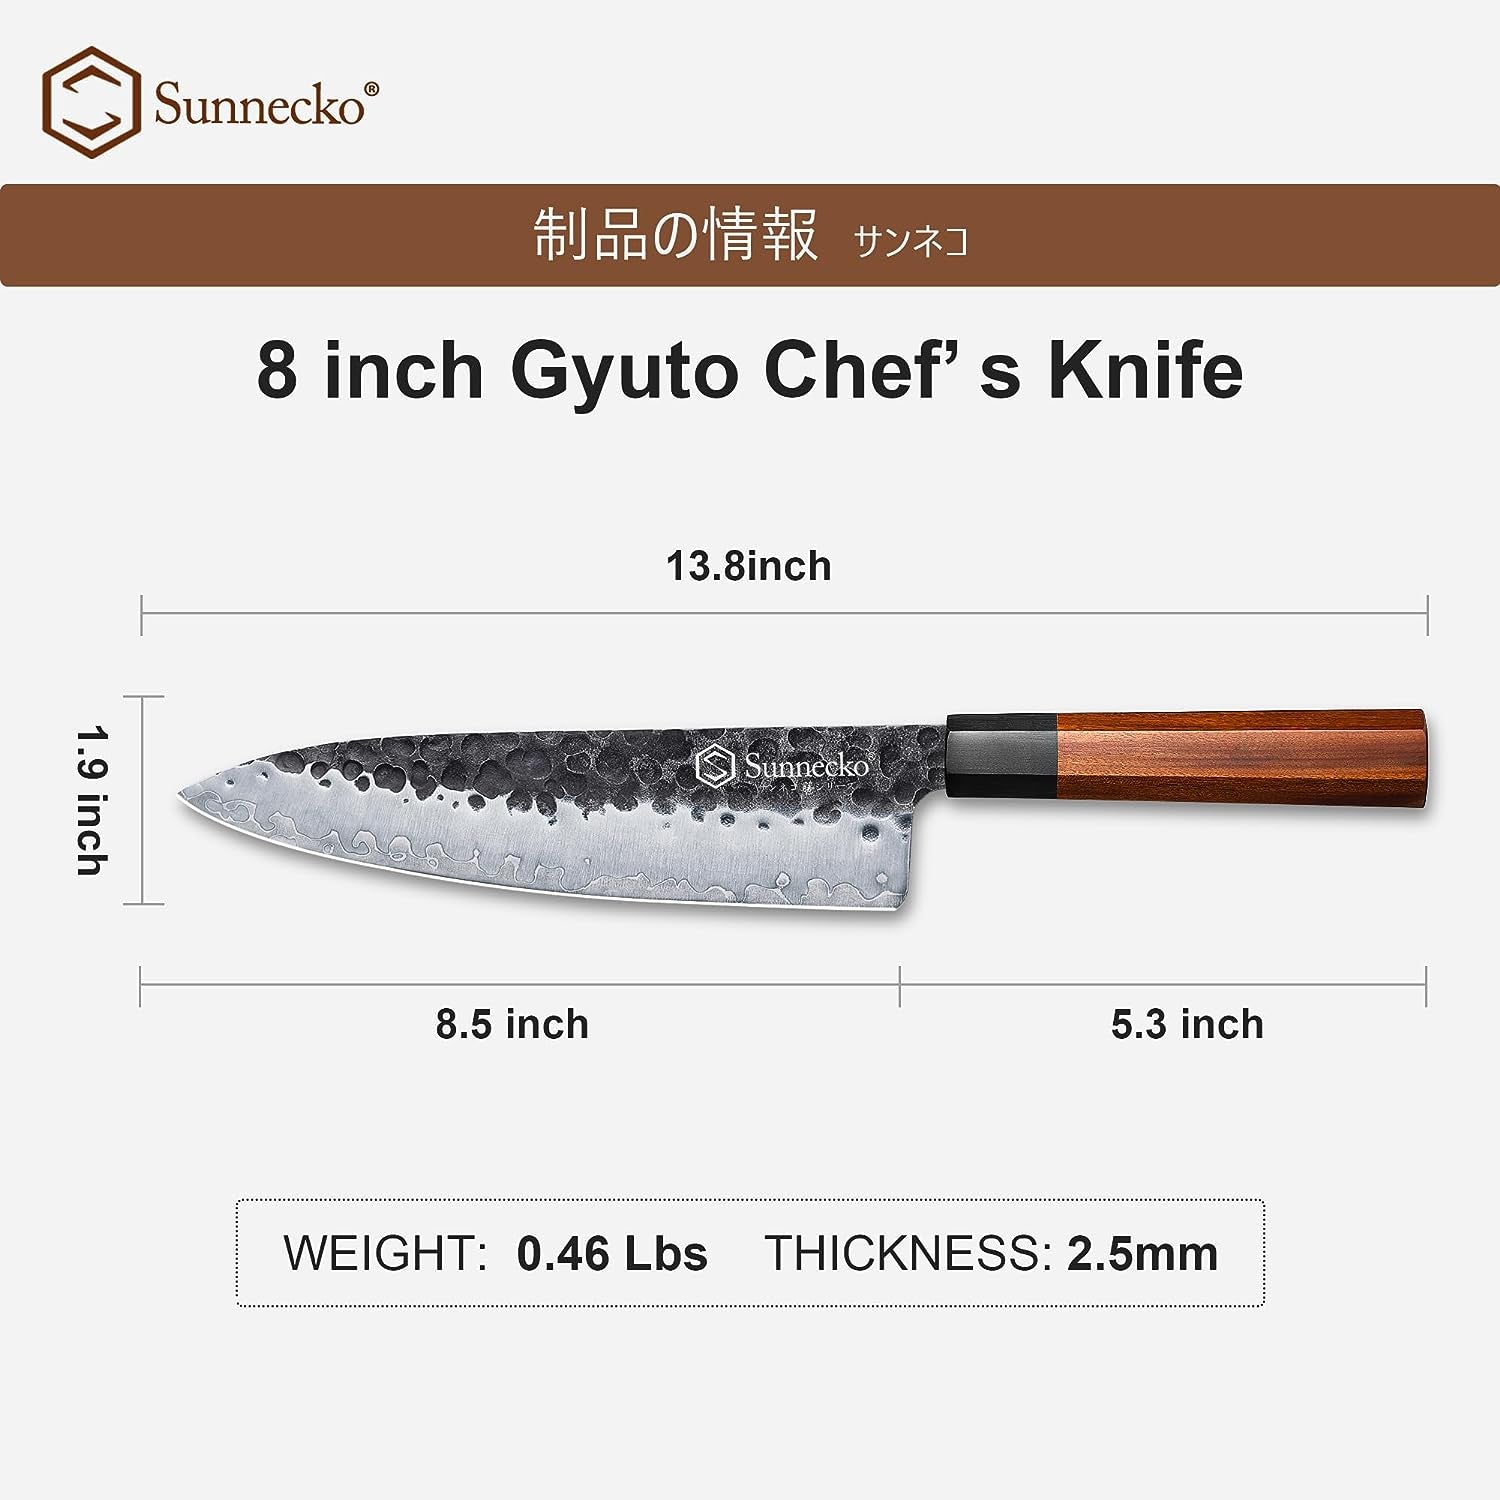 KEEMAKE Japanese Knife Gyuto Chef Knife 8 inch Kitchen Knife, Hand Forged  Sharp Knife 3 Layer 9CR18MOV High Carbon Steel Cooking Knife with Octagonal